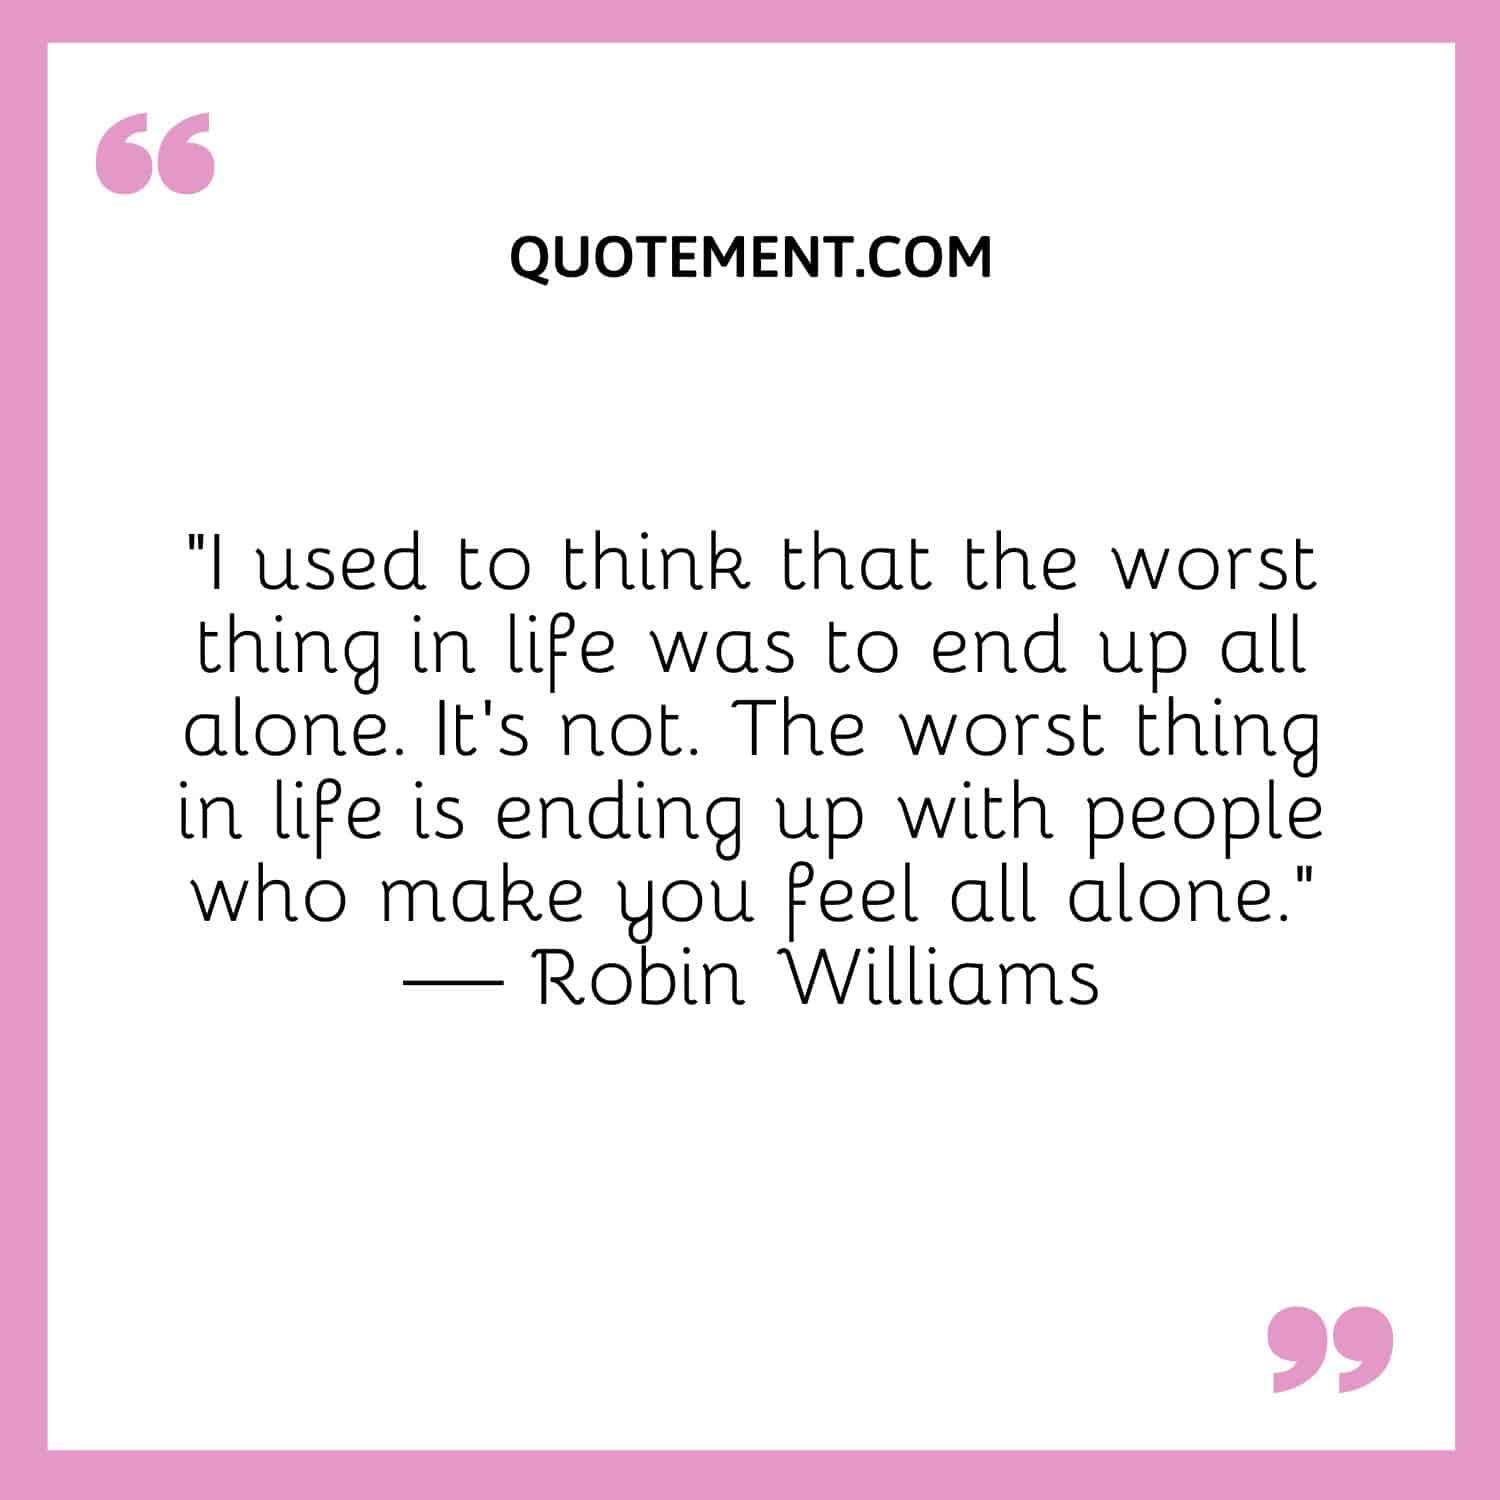 I used to think that the worst thing in life was to end up all alone